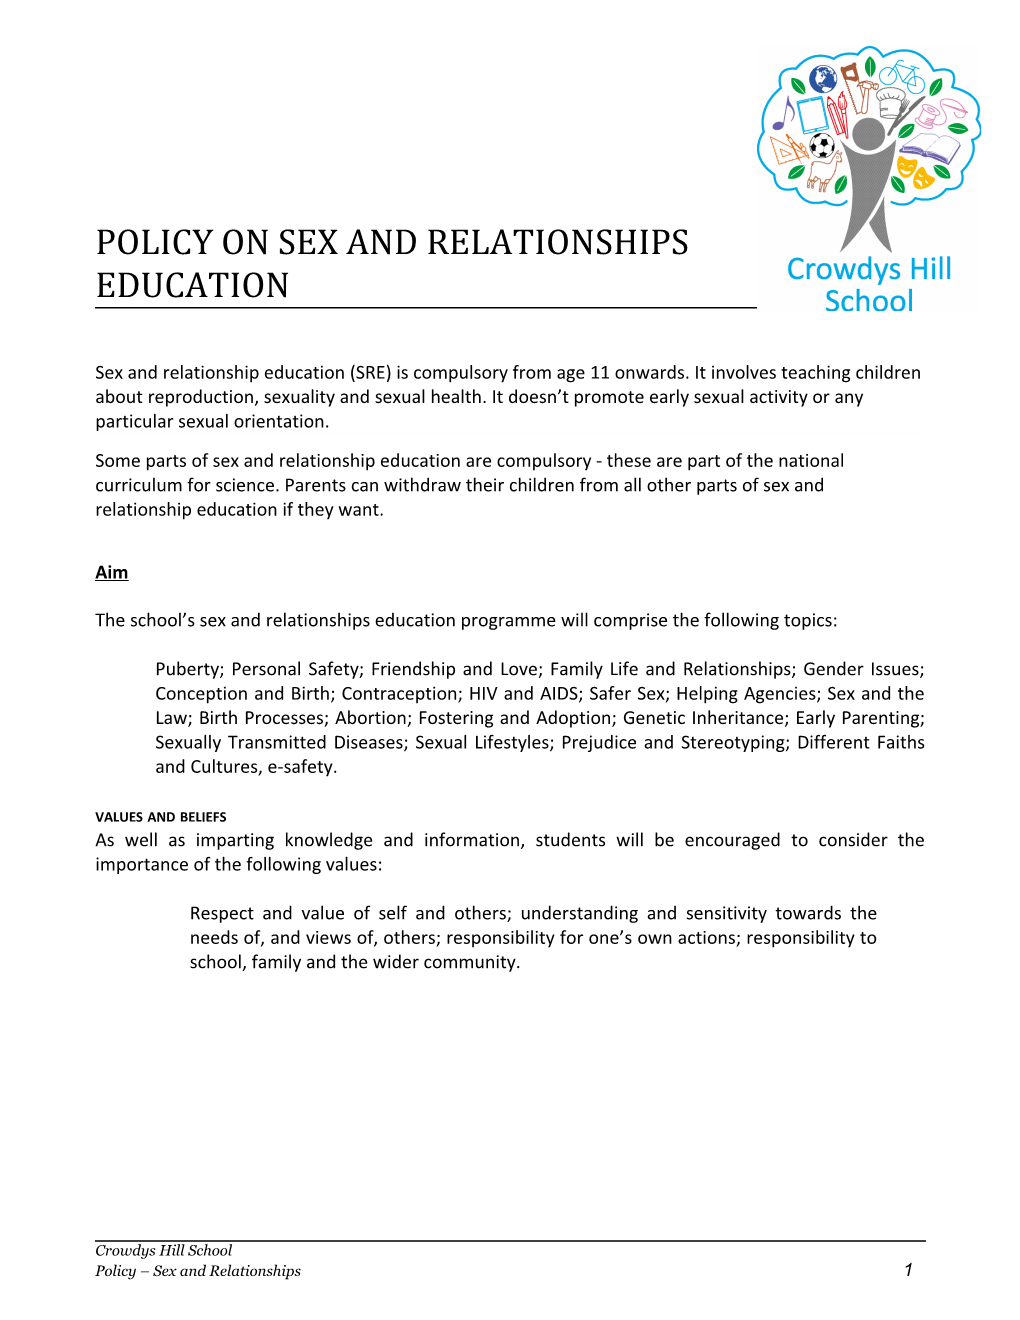 Policy on Sex and Relationships